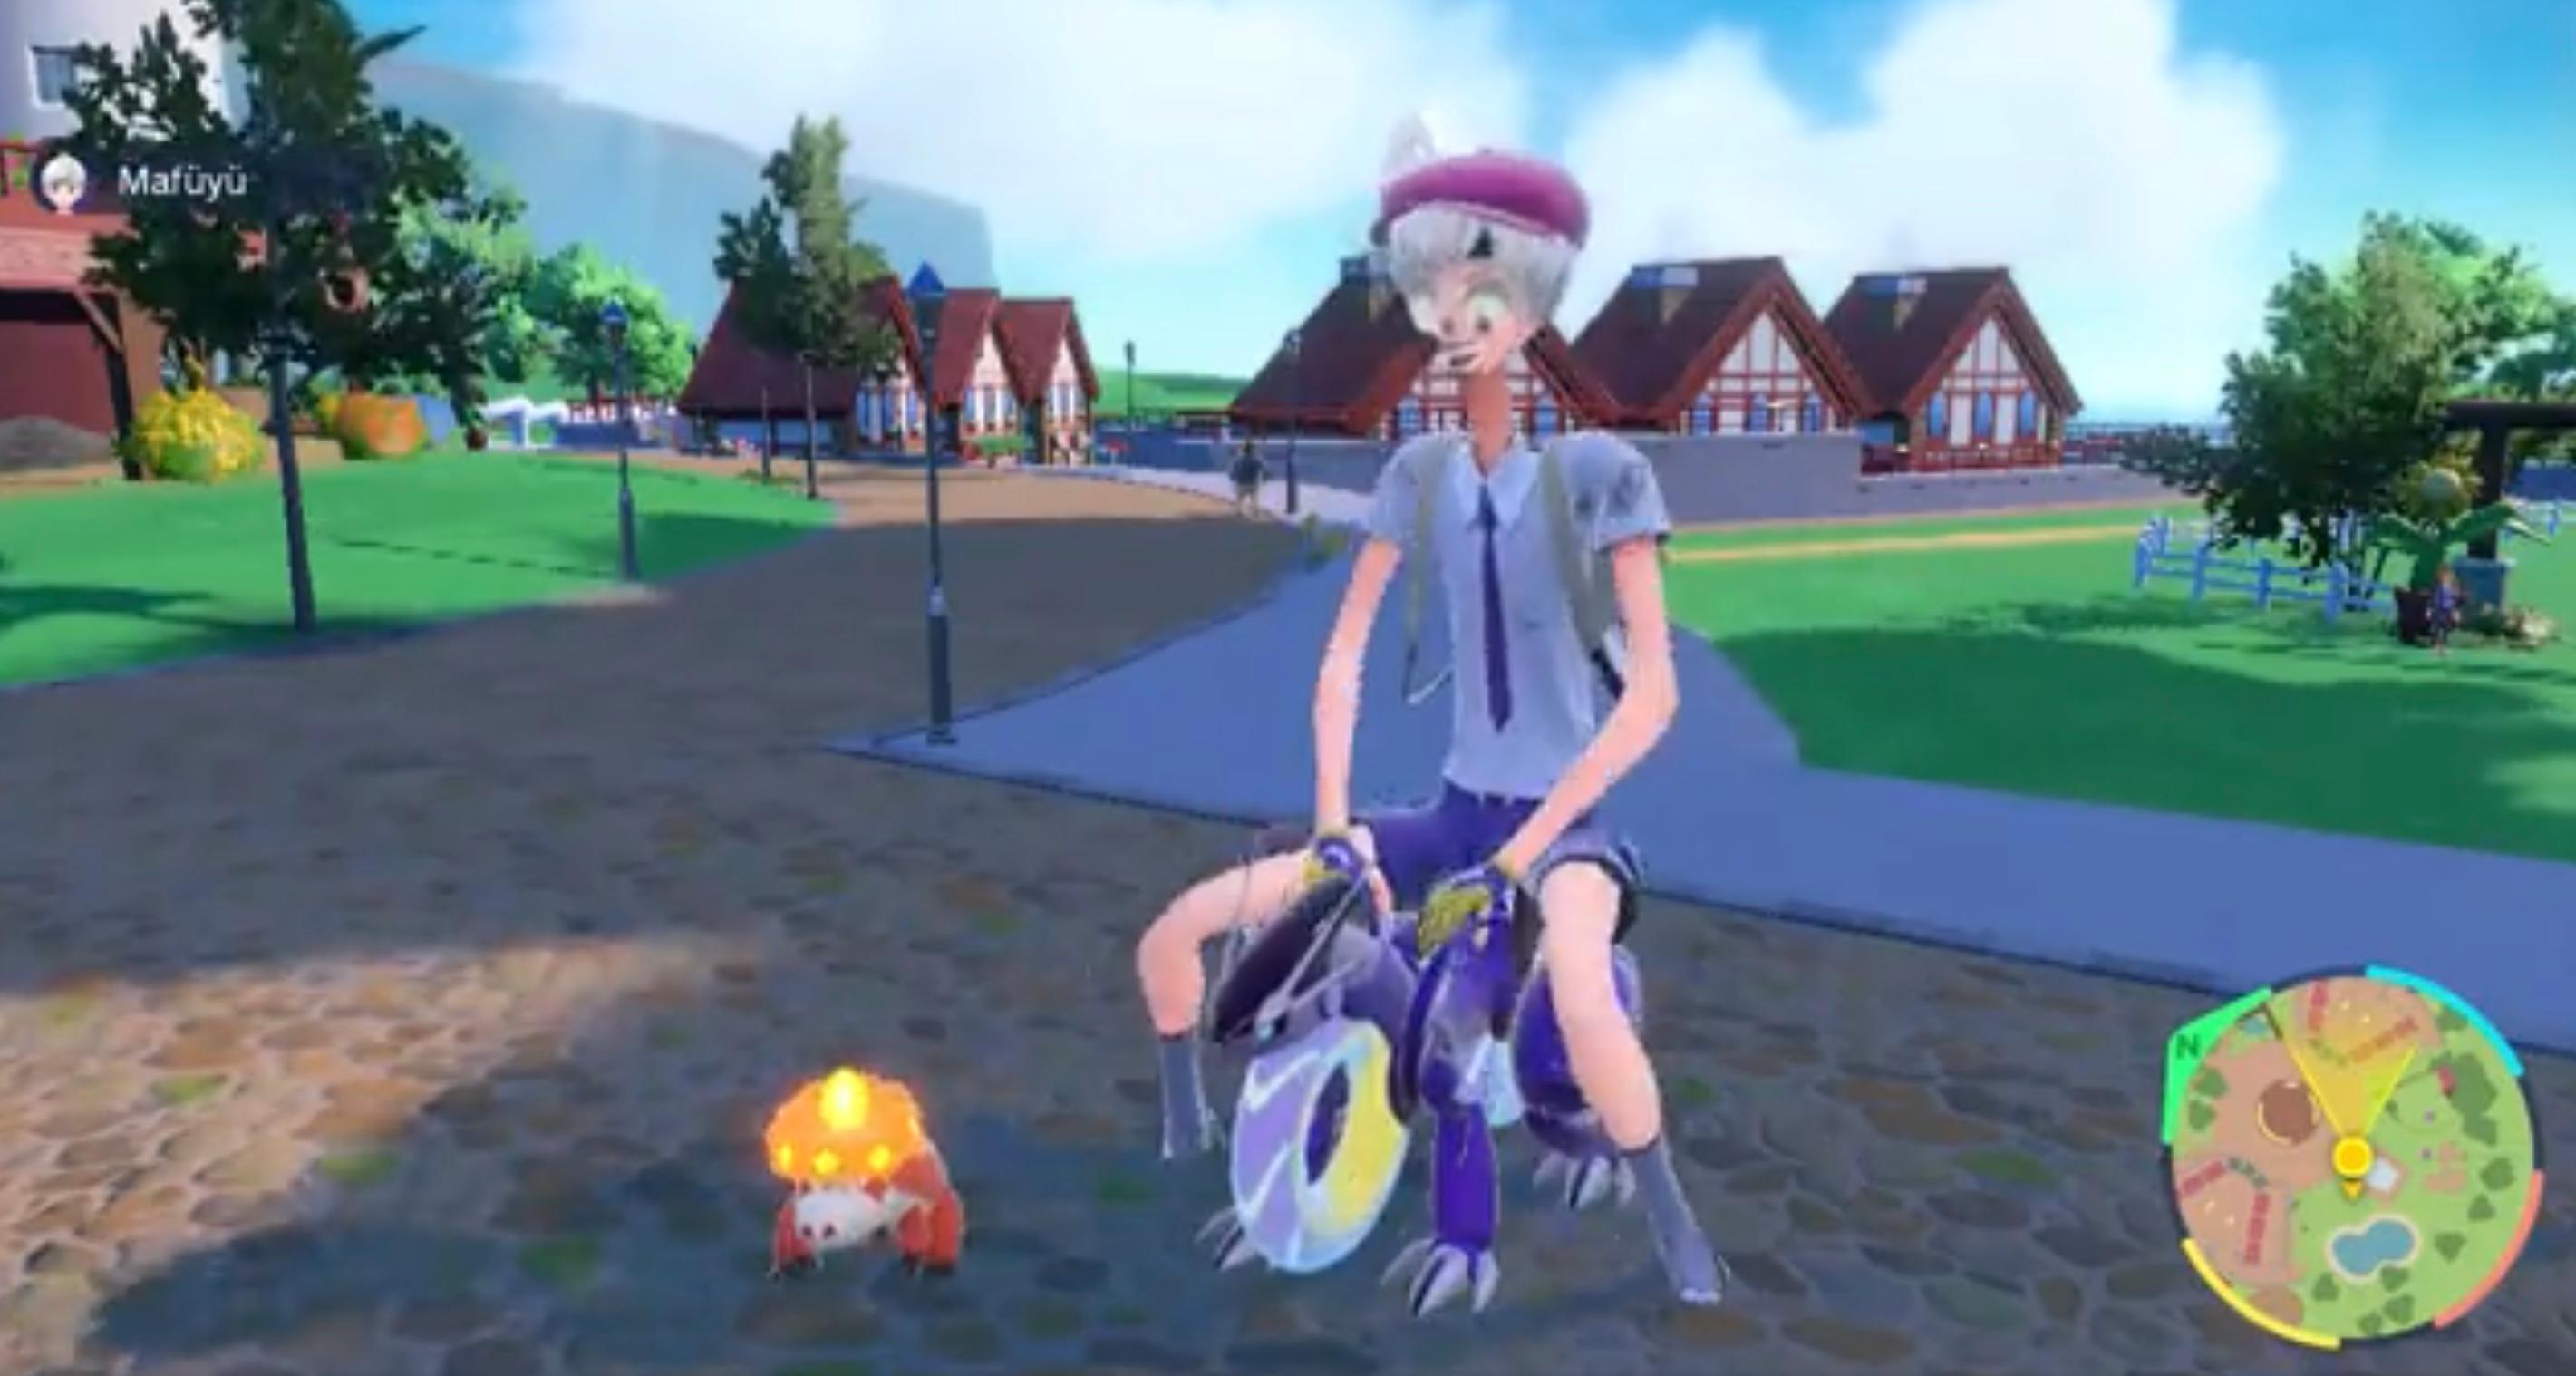 PC modders are running Pokemon Scarlet & Violet at 60fps - Video